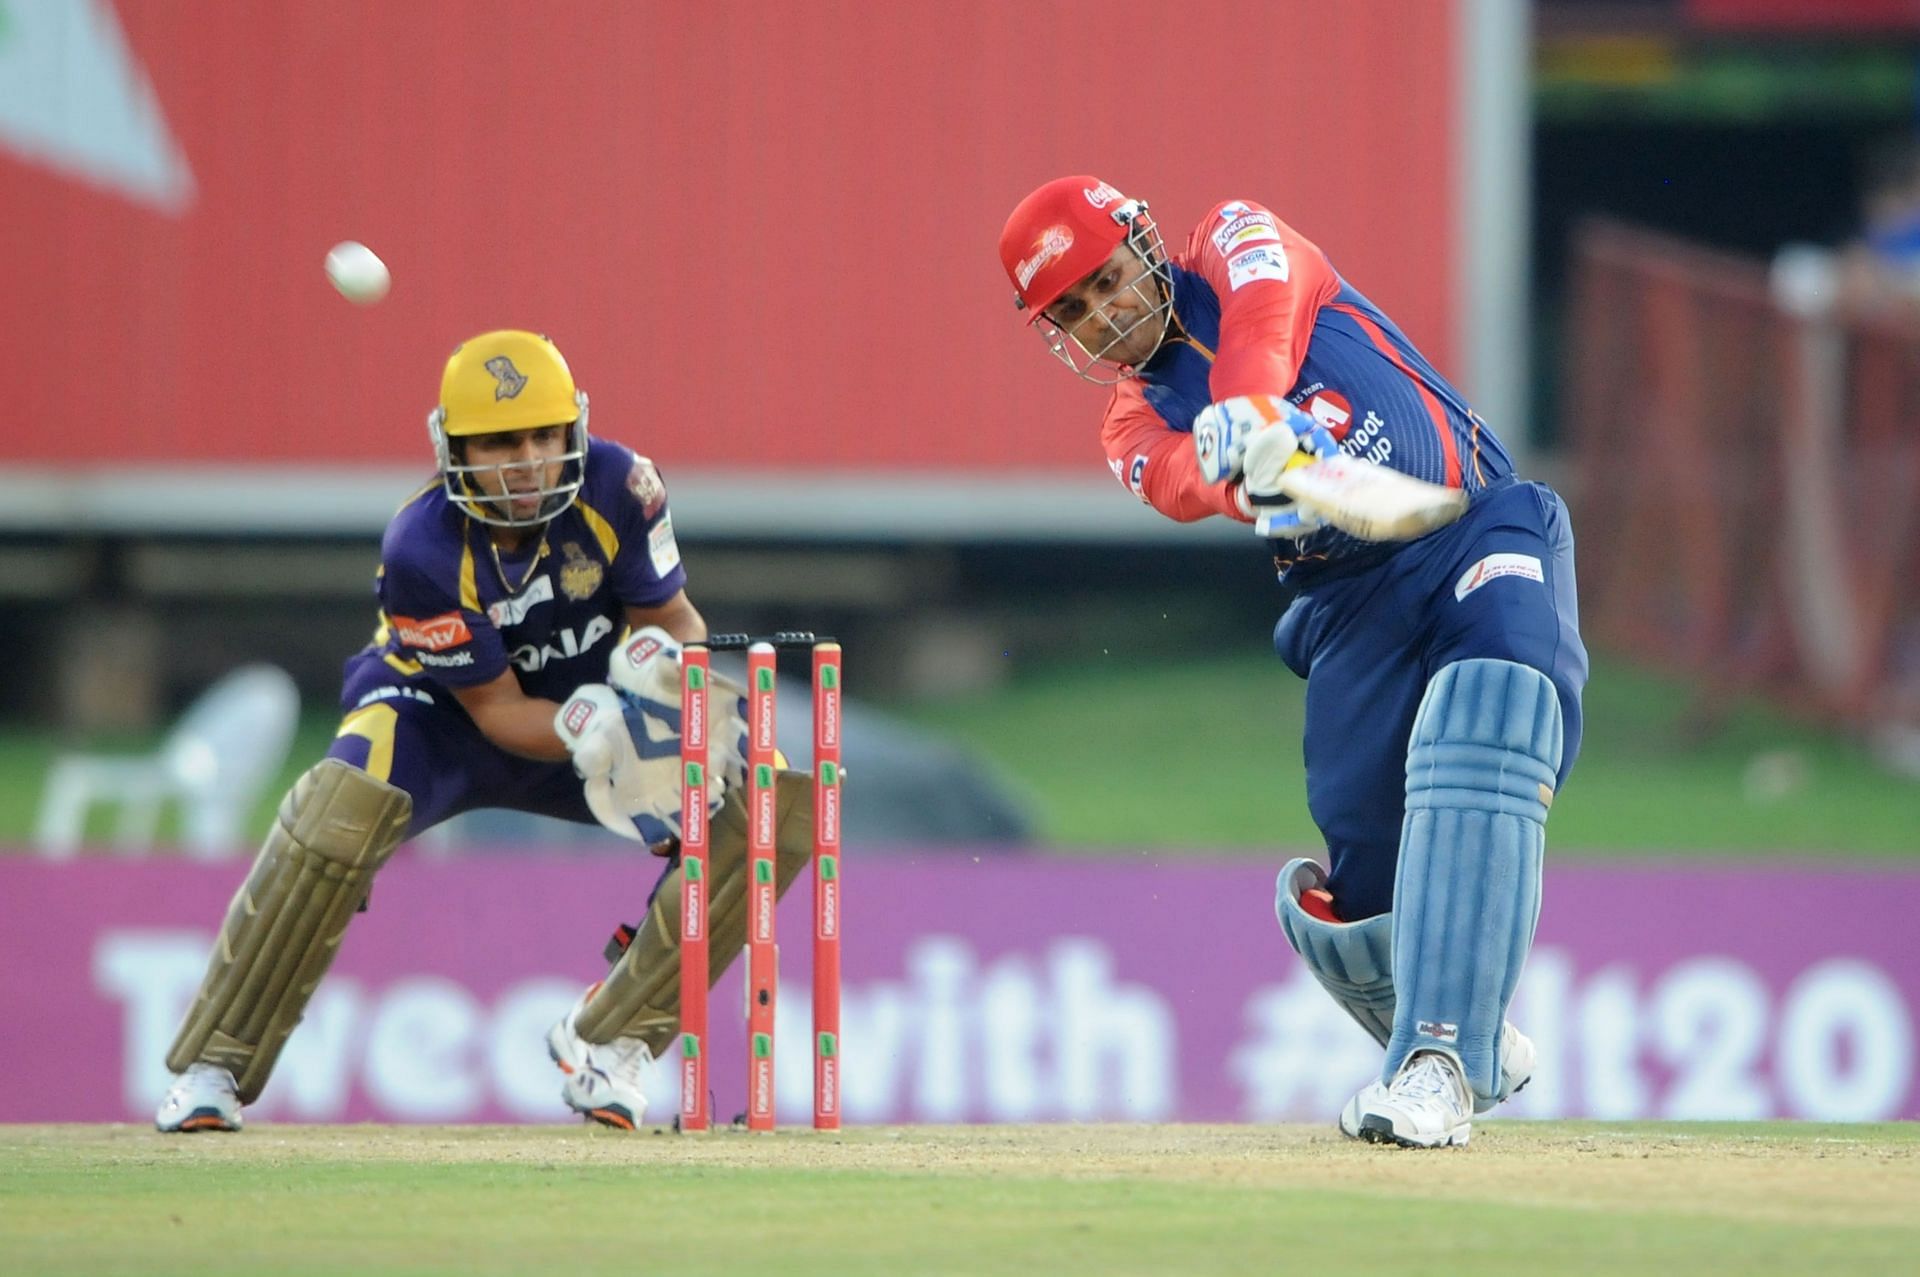 Sehwag played for DD from 2008 to 2013